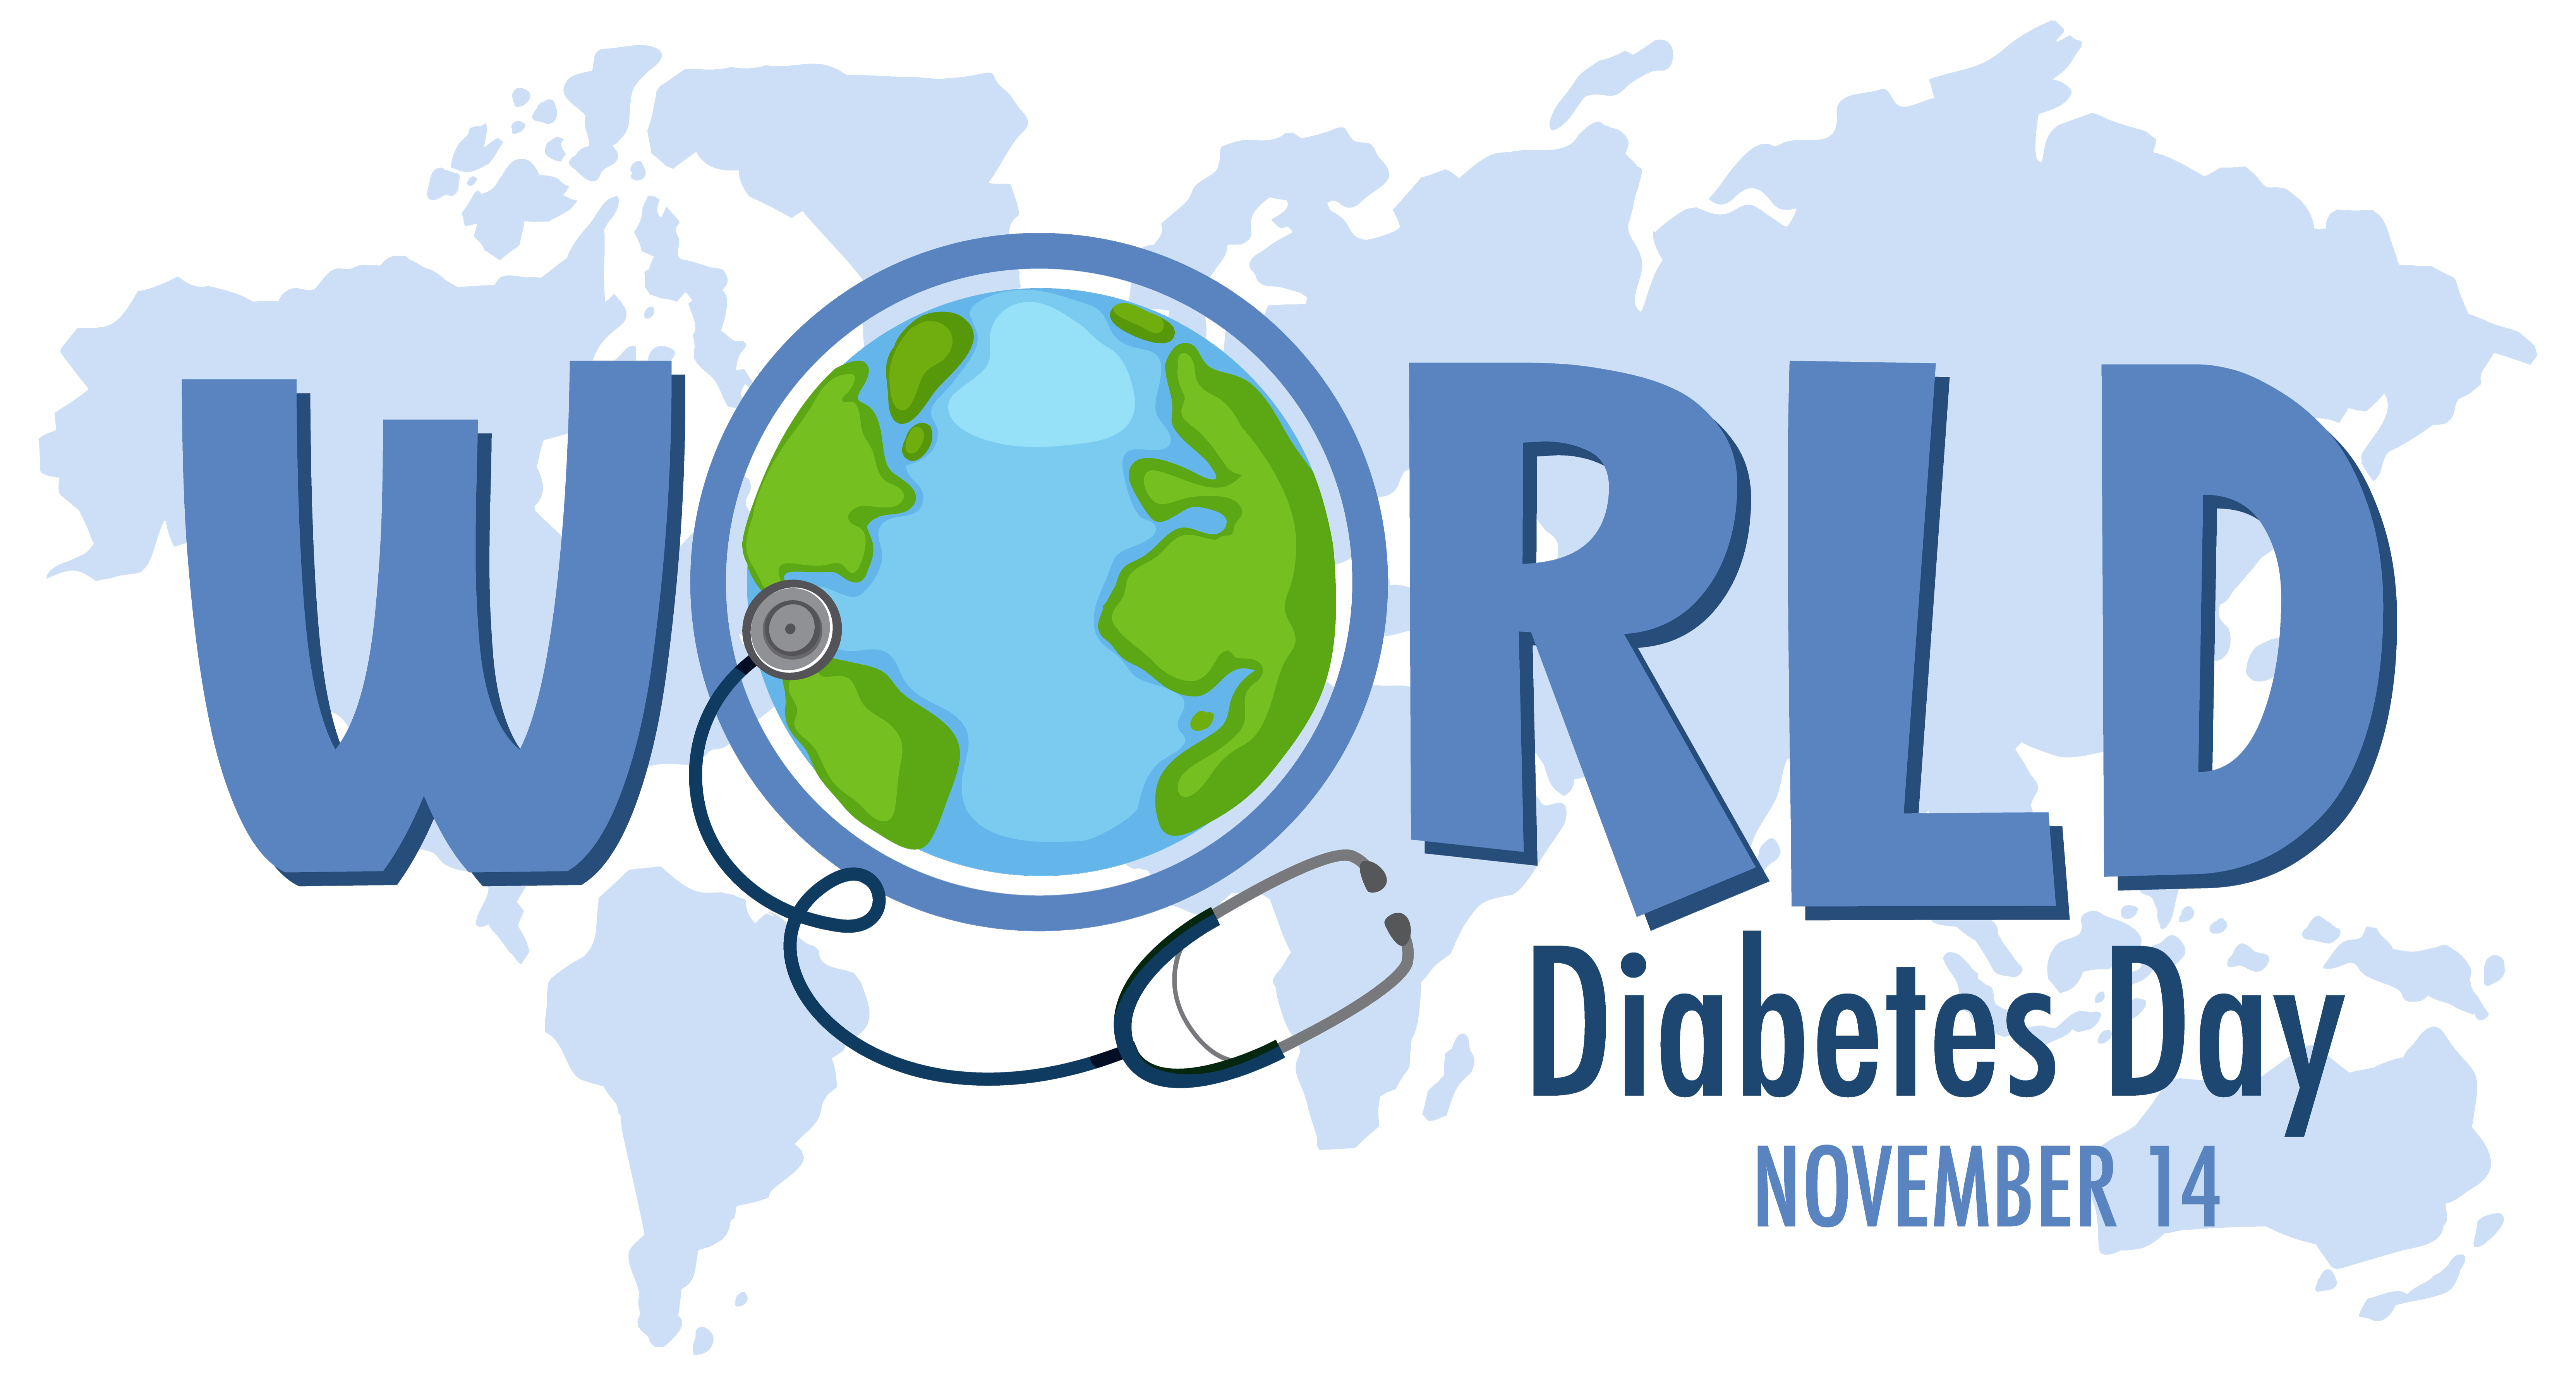 World Diabetes Day logo or banner with the globe on the map 1590930